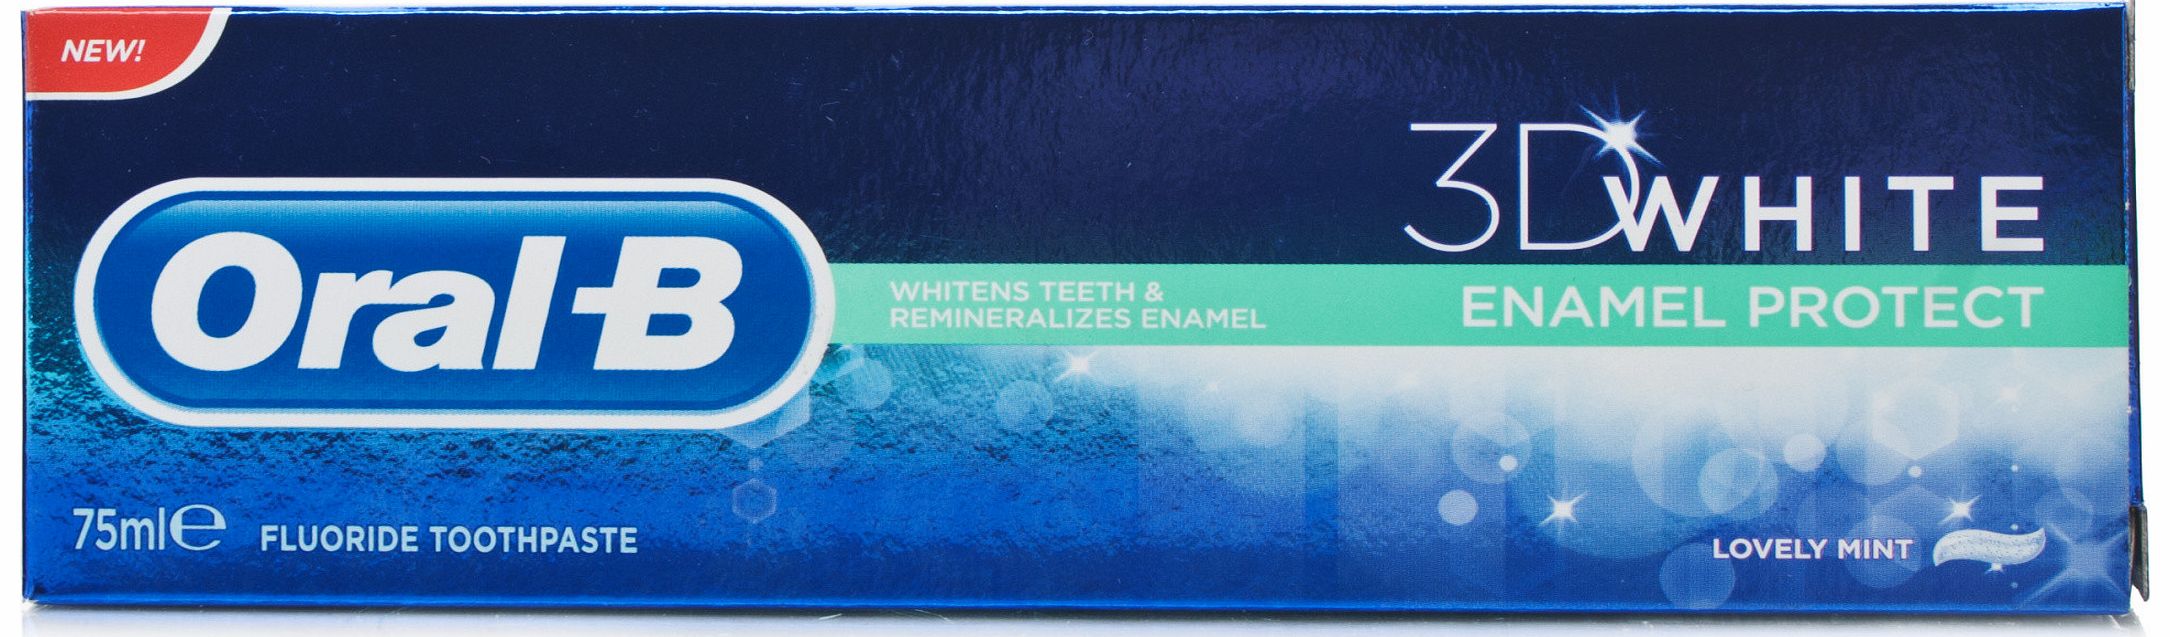 Oral B 3D Whitening Enamel Protect Toothpaste